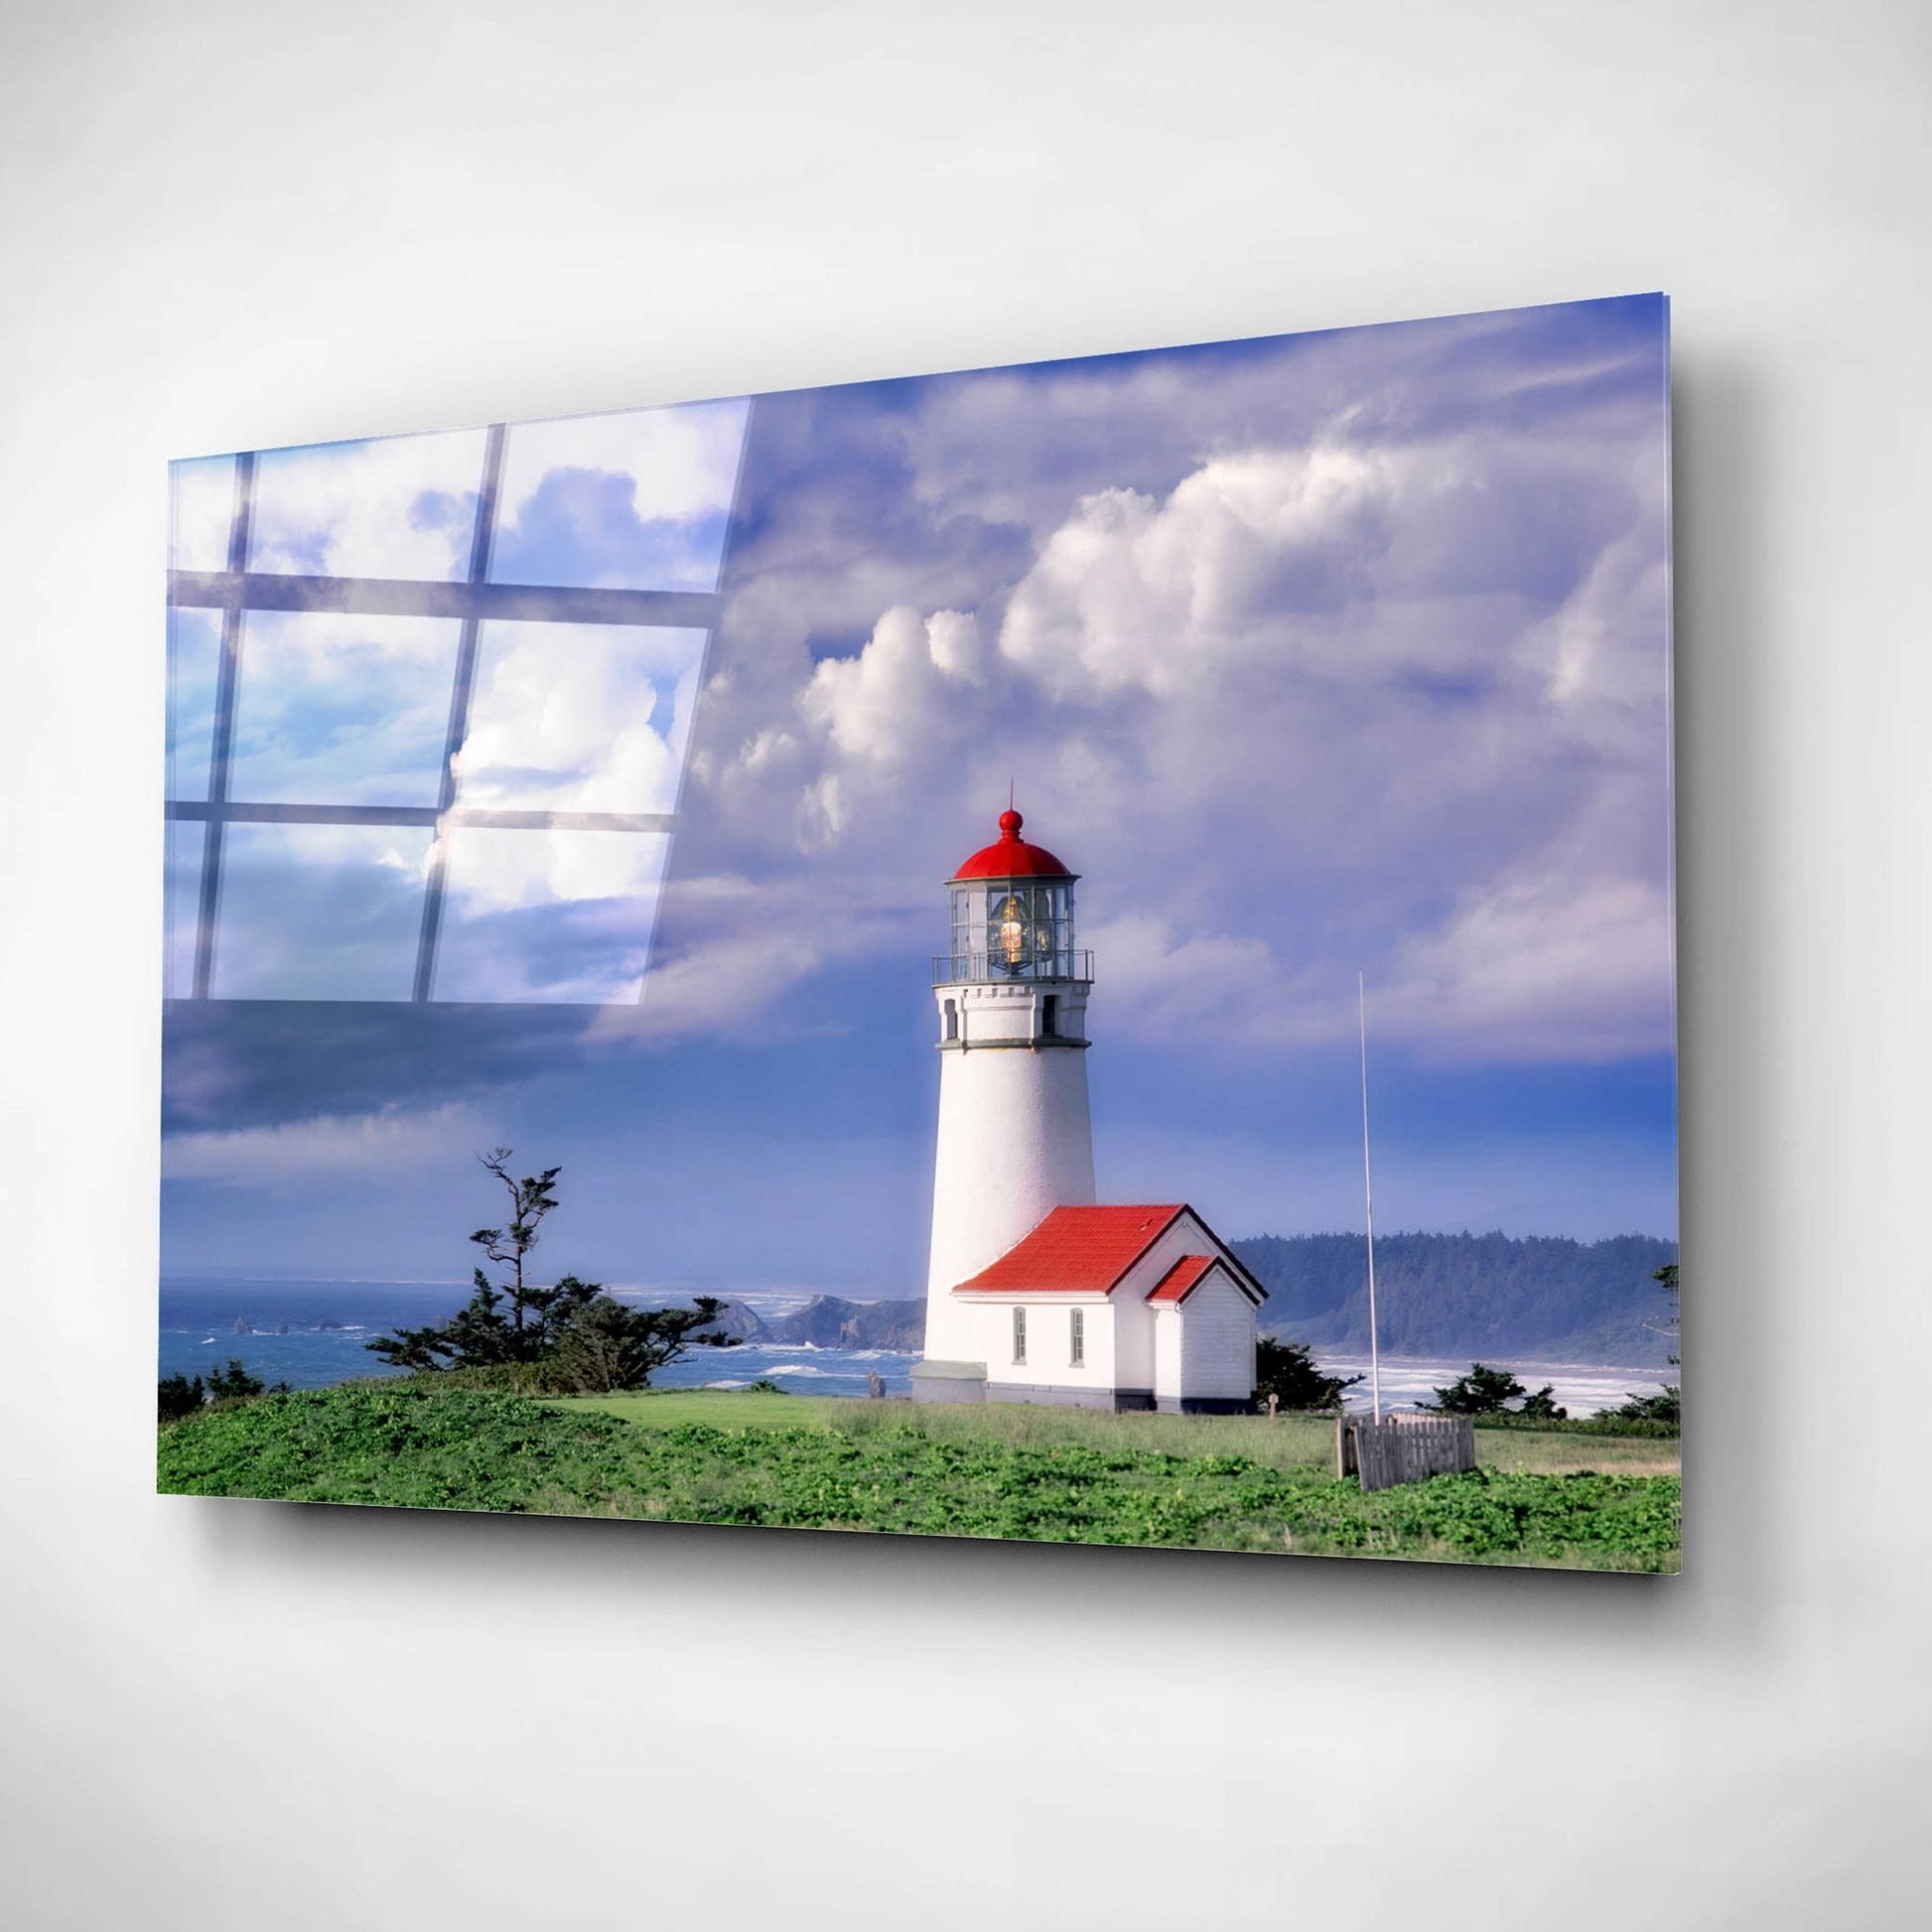 Epic Art 'Red Roof Lighthouse' by Dennis Frates, Acrylic Glass Wall Art,16x12